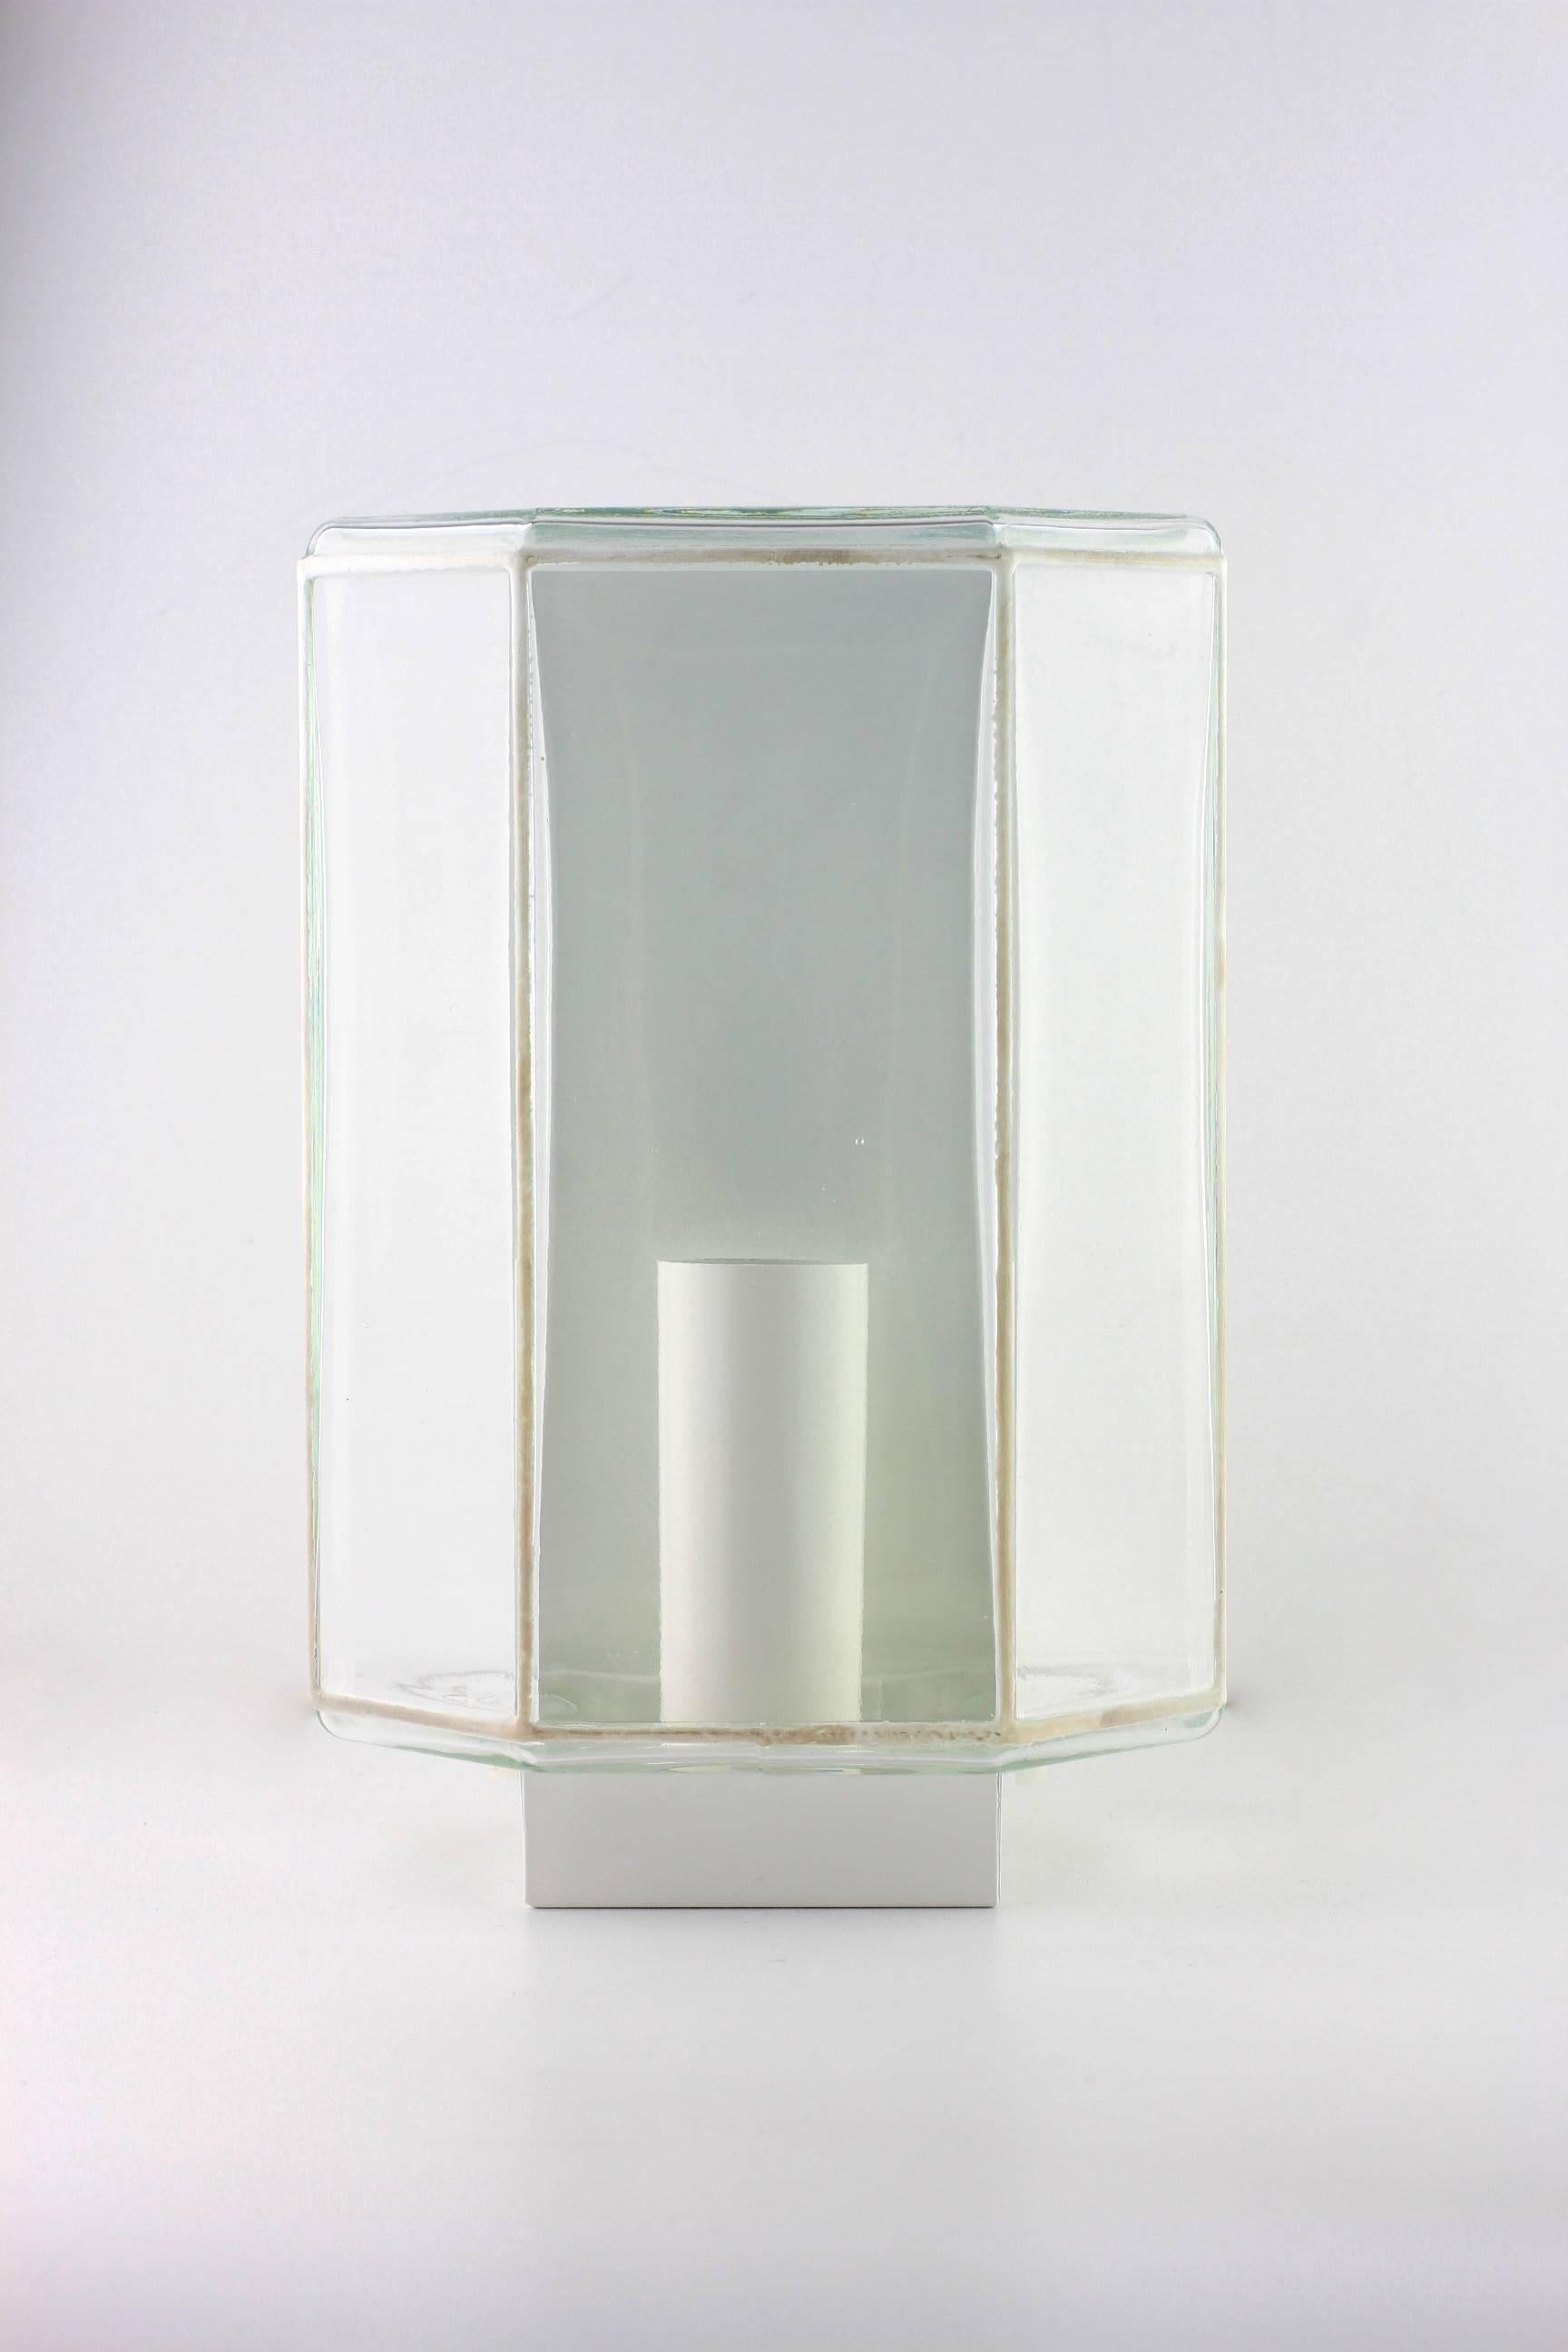 German 1 of 3 1970s Minimalist White and Clear Glass Wall Lights by Glashütte Limburg